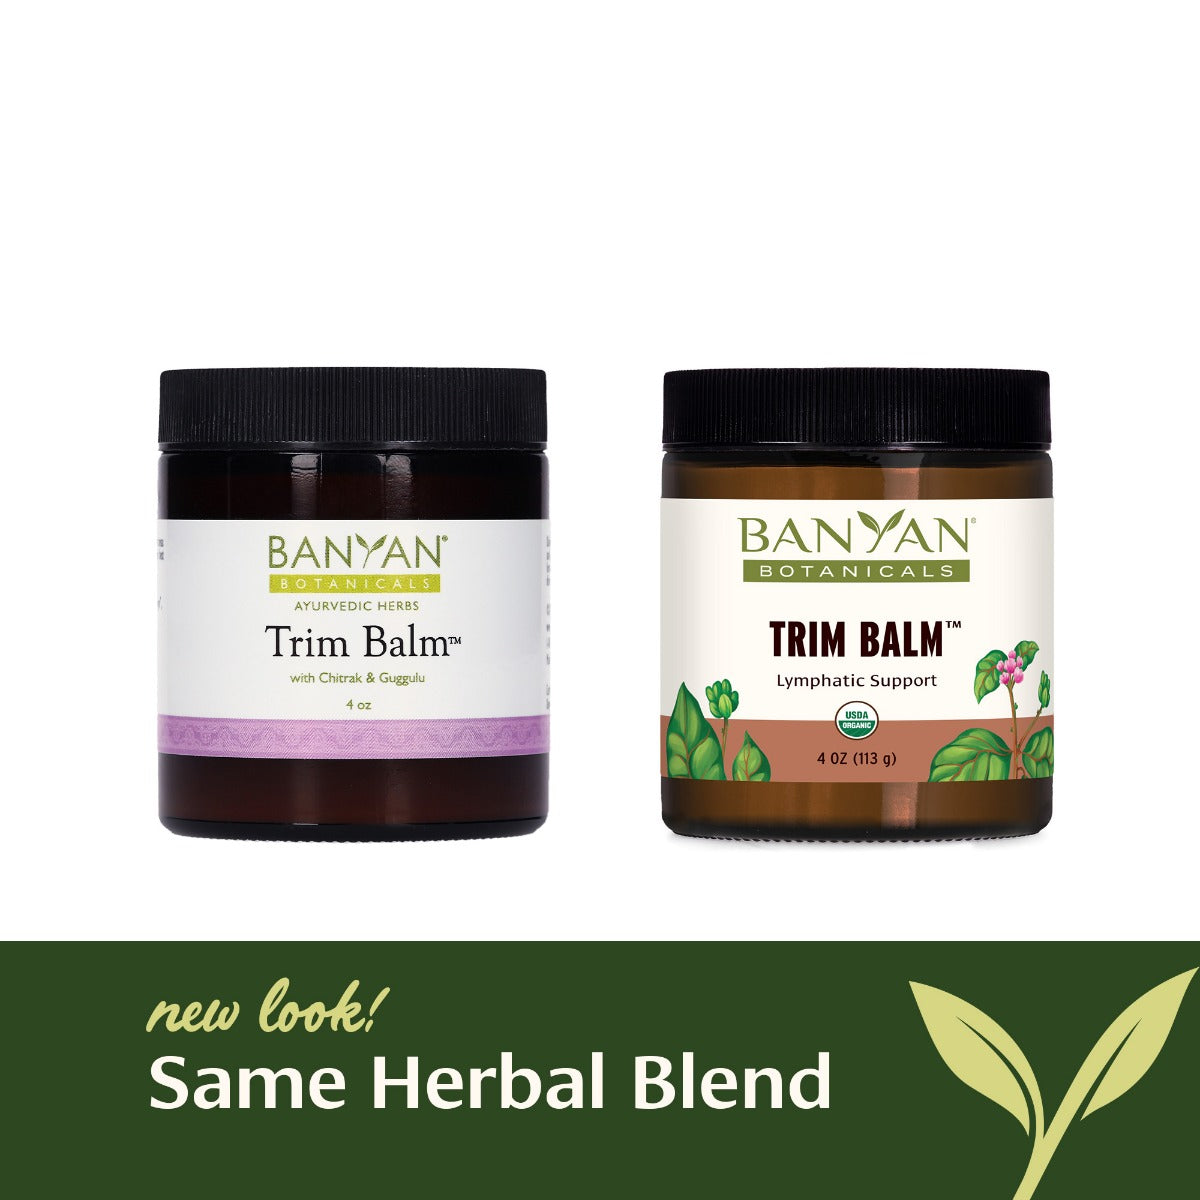 Trim Balm Lymphatic Support new vs old branding